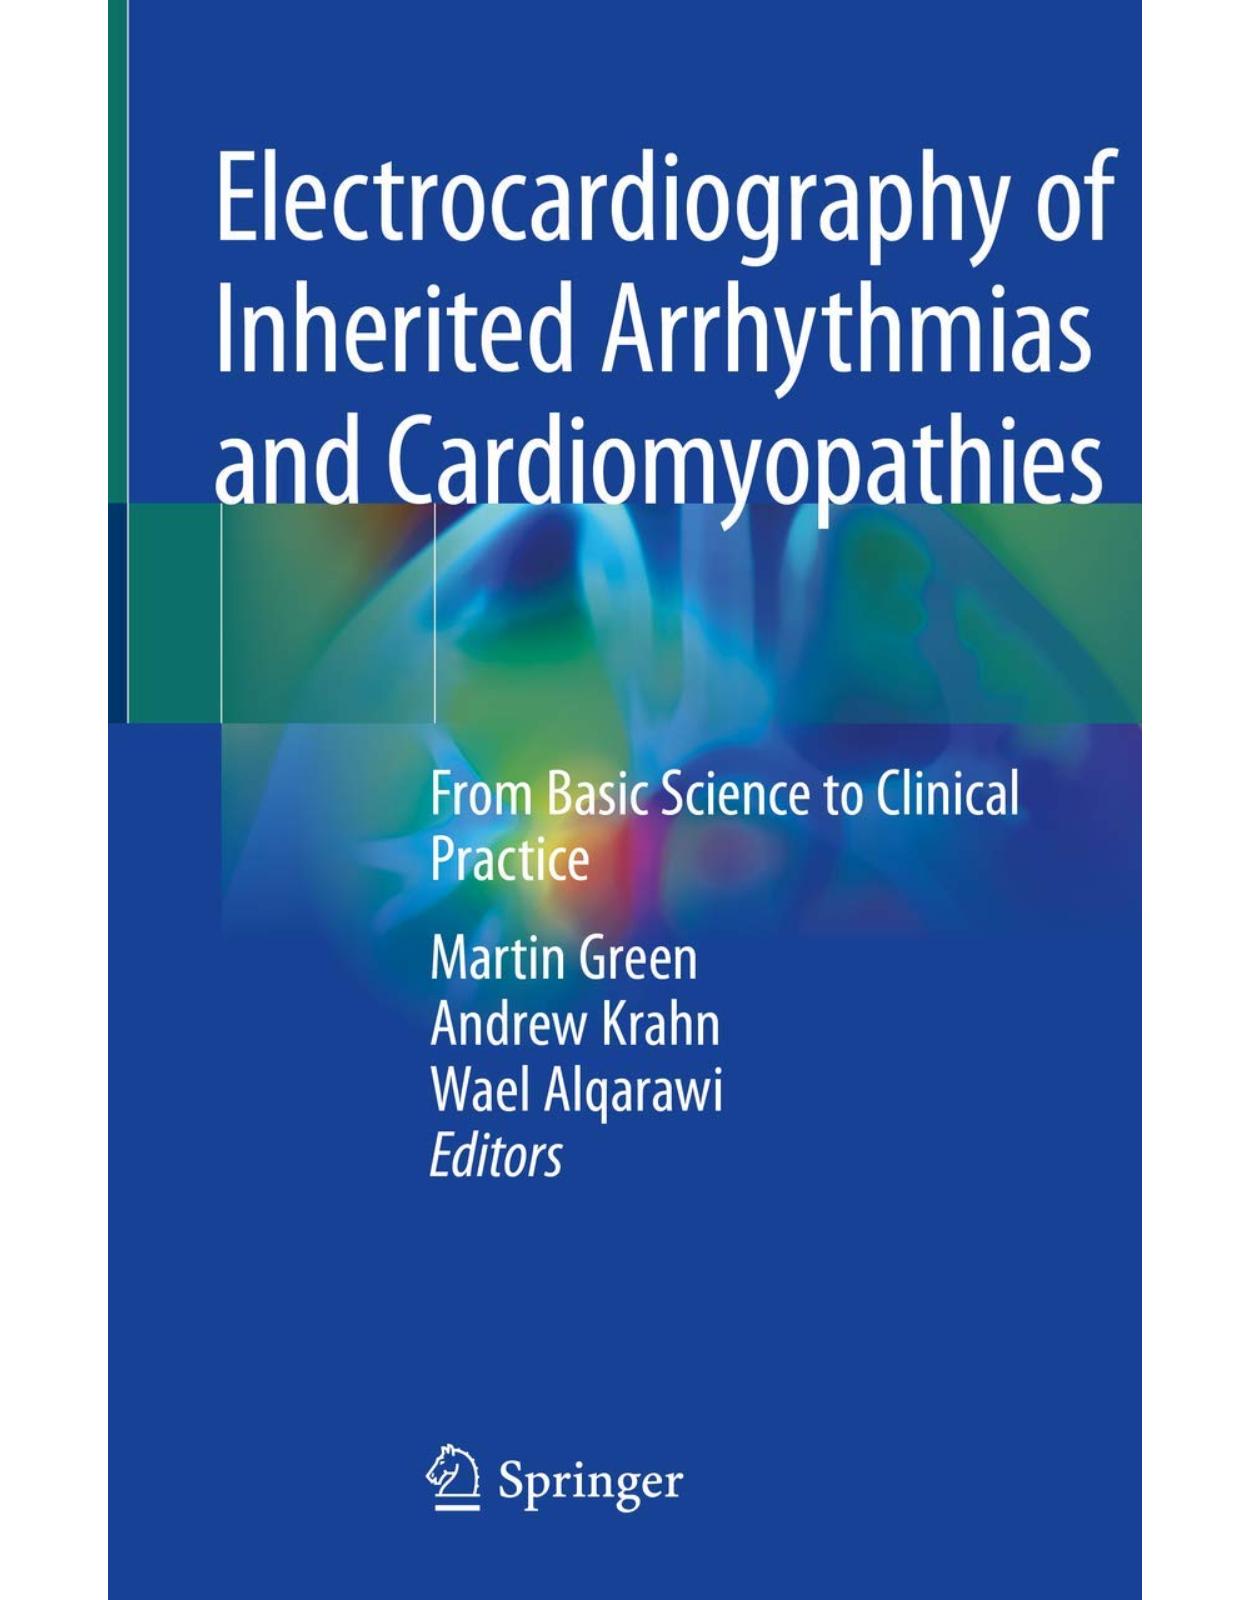 Electrocardiography of Inherited Arrhythmias and Cardiomyopathies: From Basic Science to Clinical Practice 